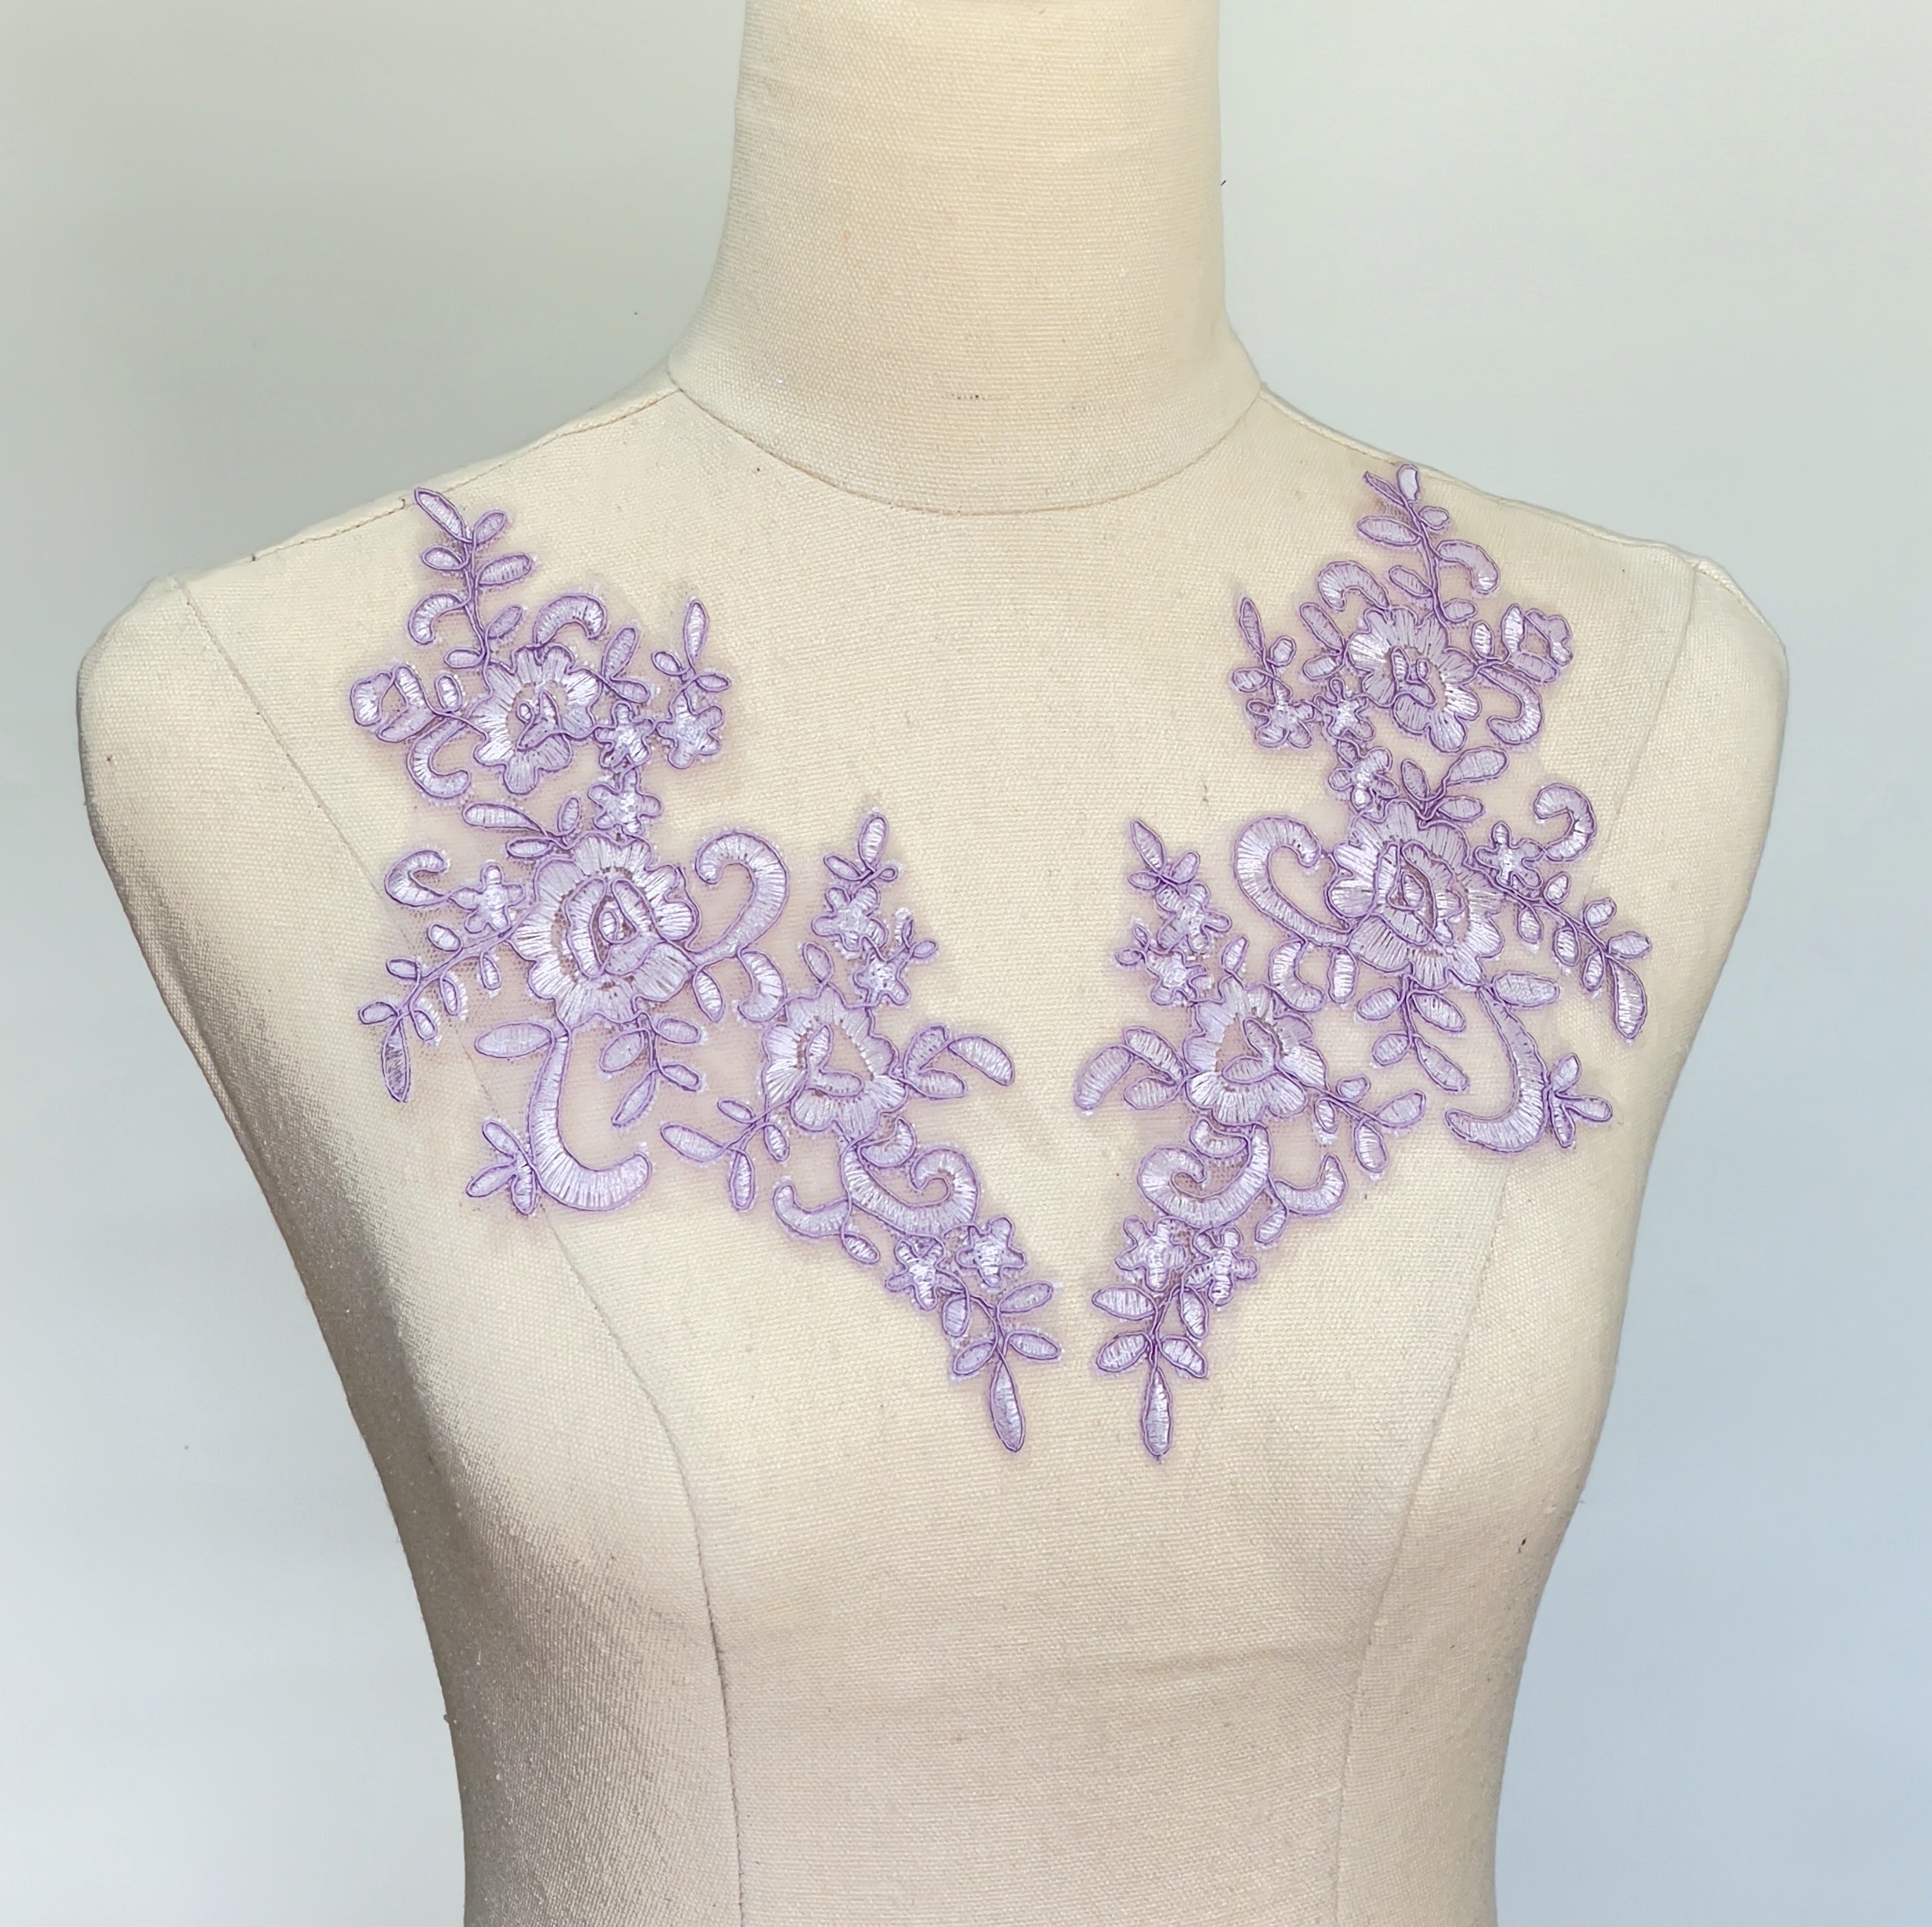 Lilac purple embroidered floral applique with corded edging embroidered onto a net backing.   The size is 23 cm x 11 cm.  